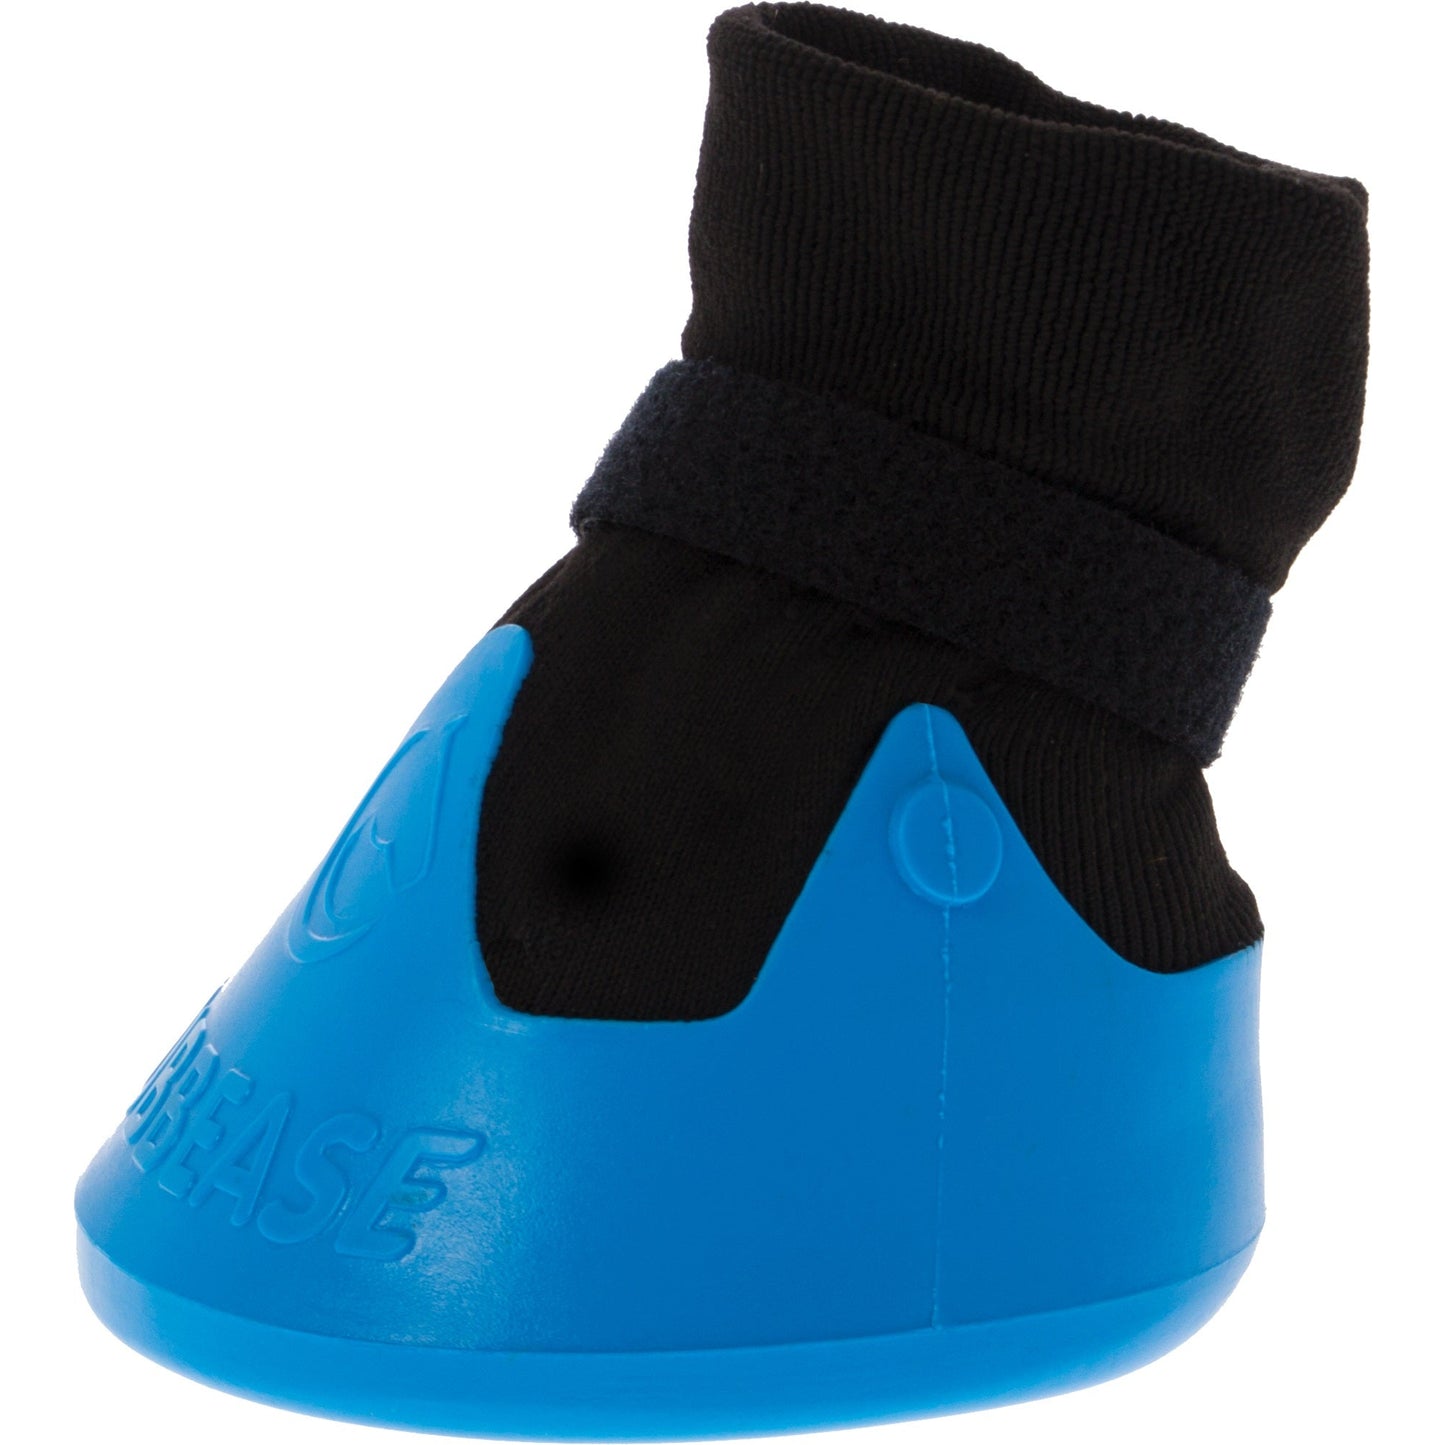 A blue medical boot for foot injuries with a black strap and upper wrap, isolated on a white background.